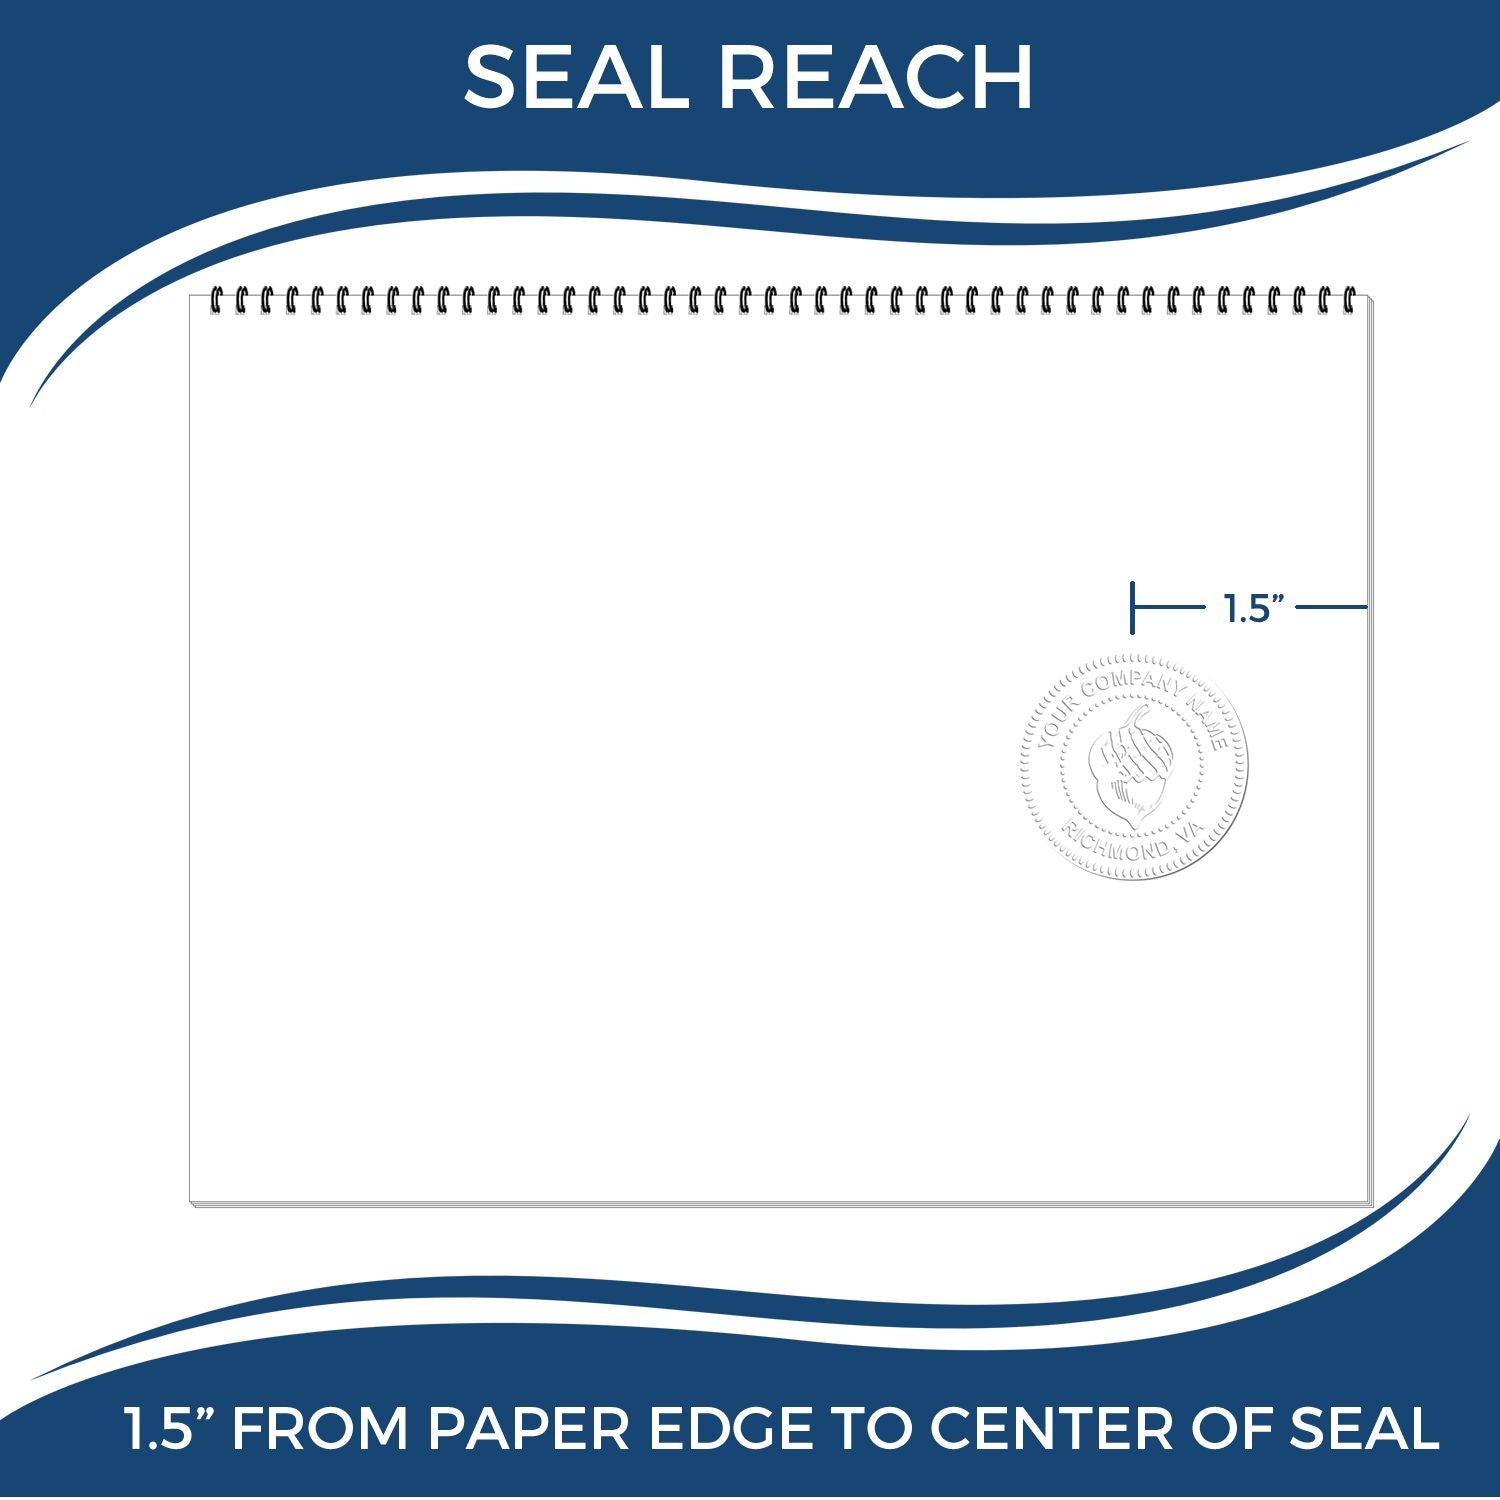 An infographic showing the seal reach which is represented by a ruler and a miniature seal image of the Soft Wisconsin Professional Engineer Seal